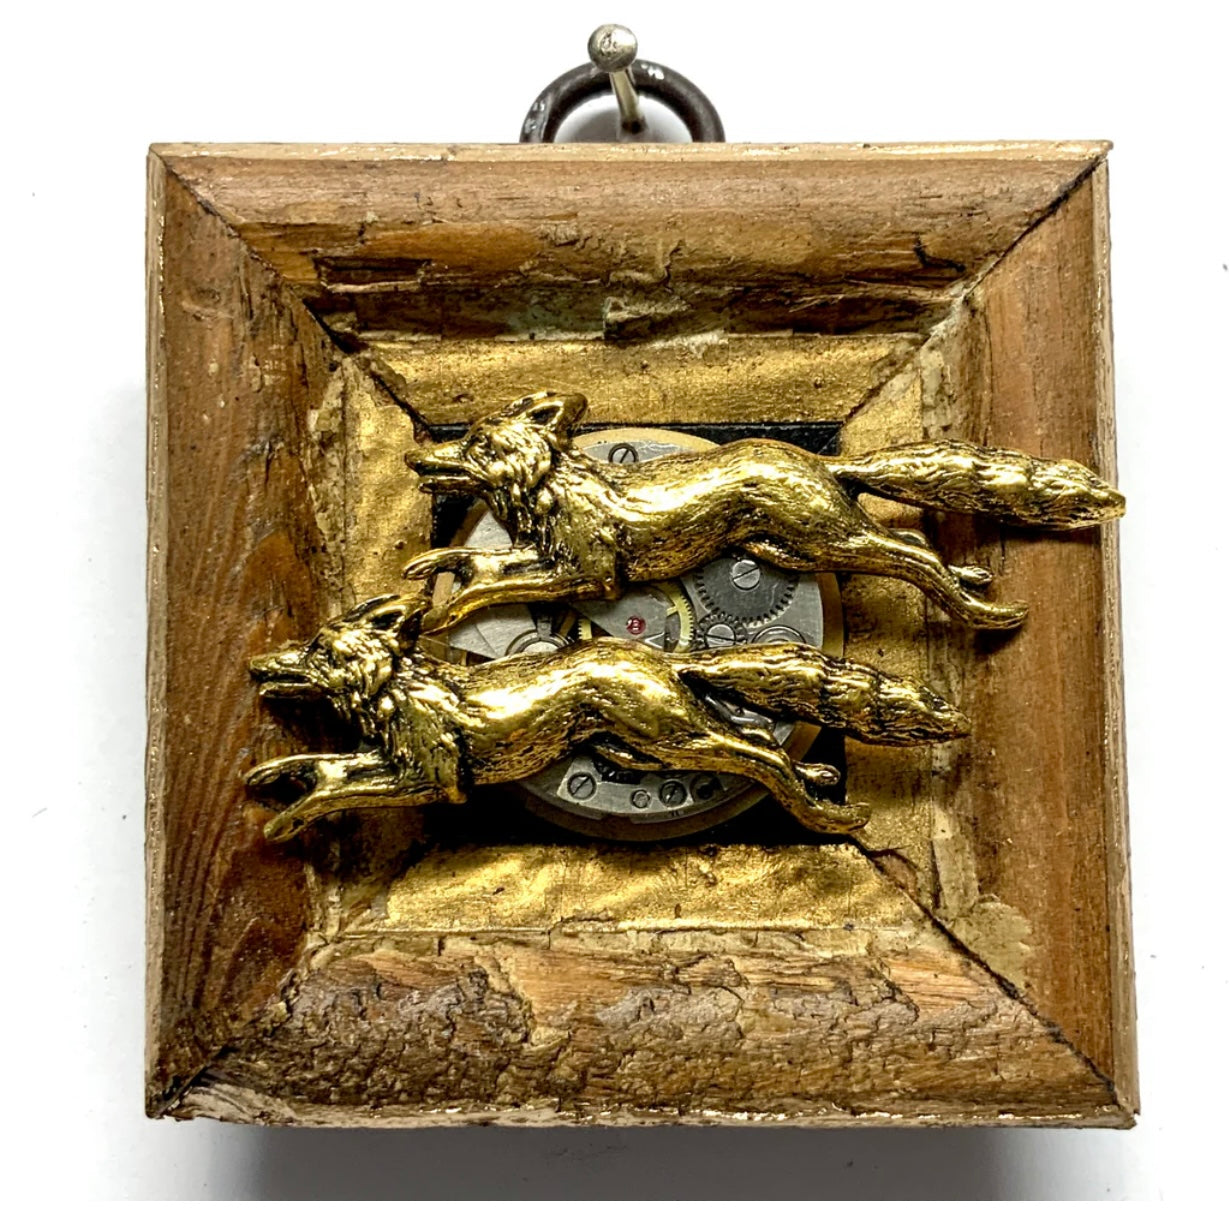 Wooden Frame with Foxes on Watch Gears